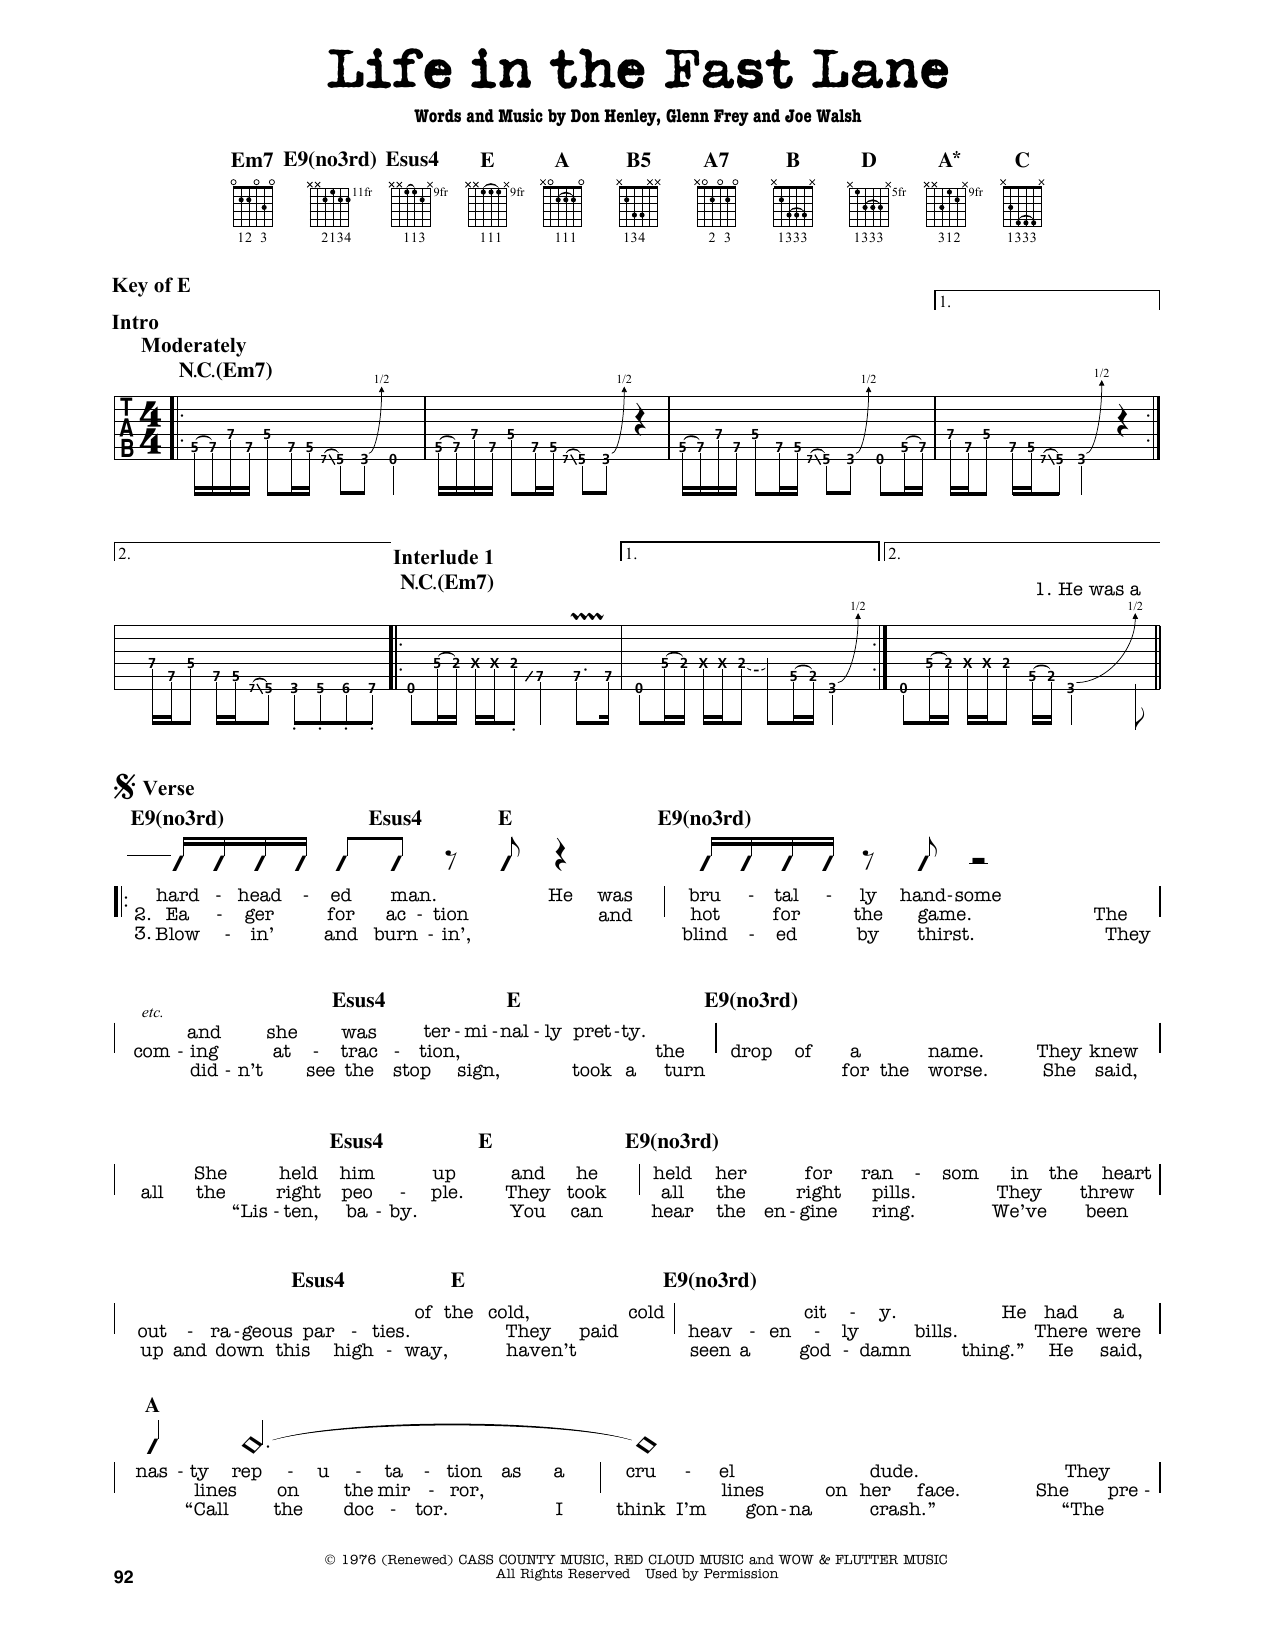 Download Eagles Life In The Fast Lane Sheet Music